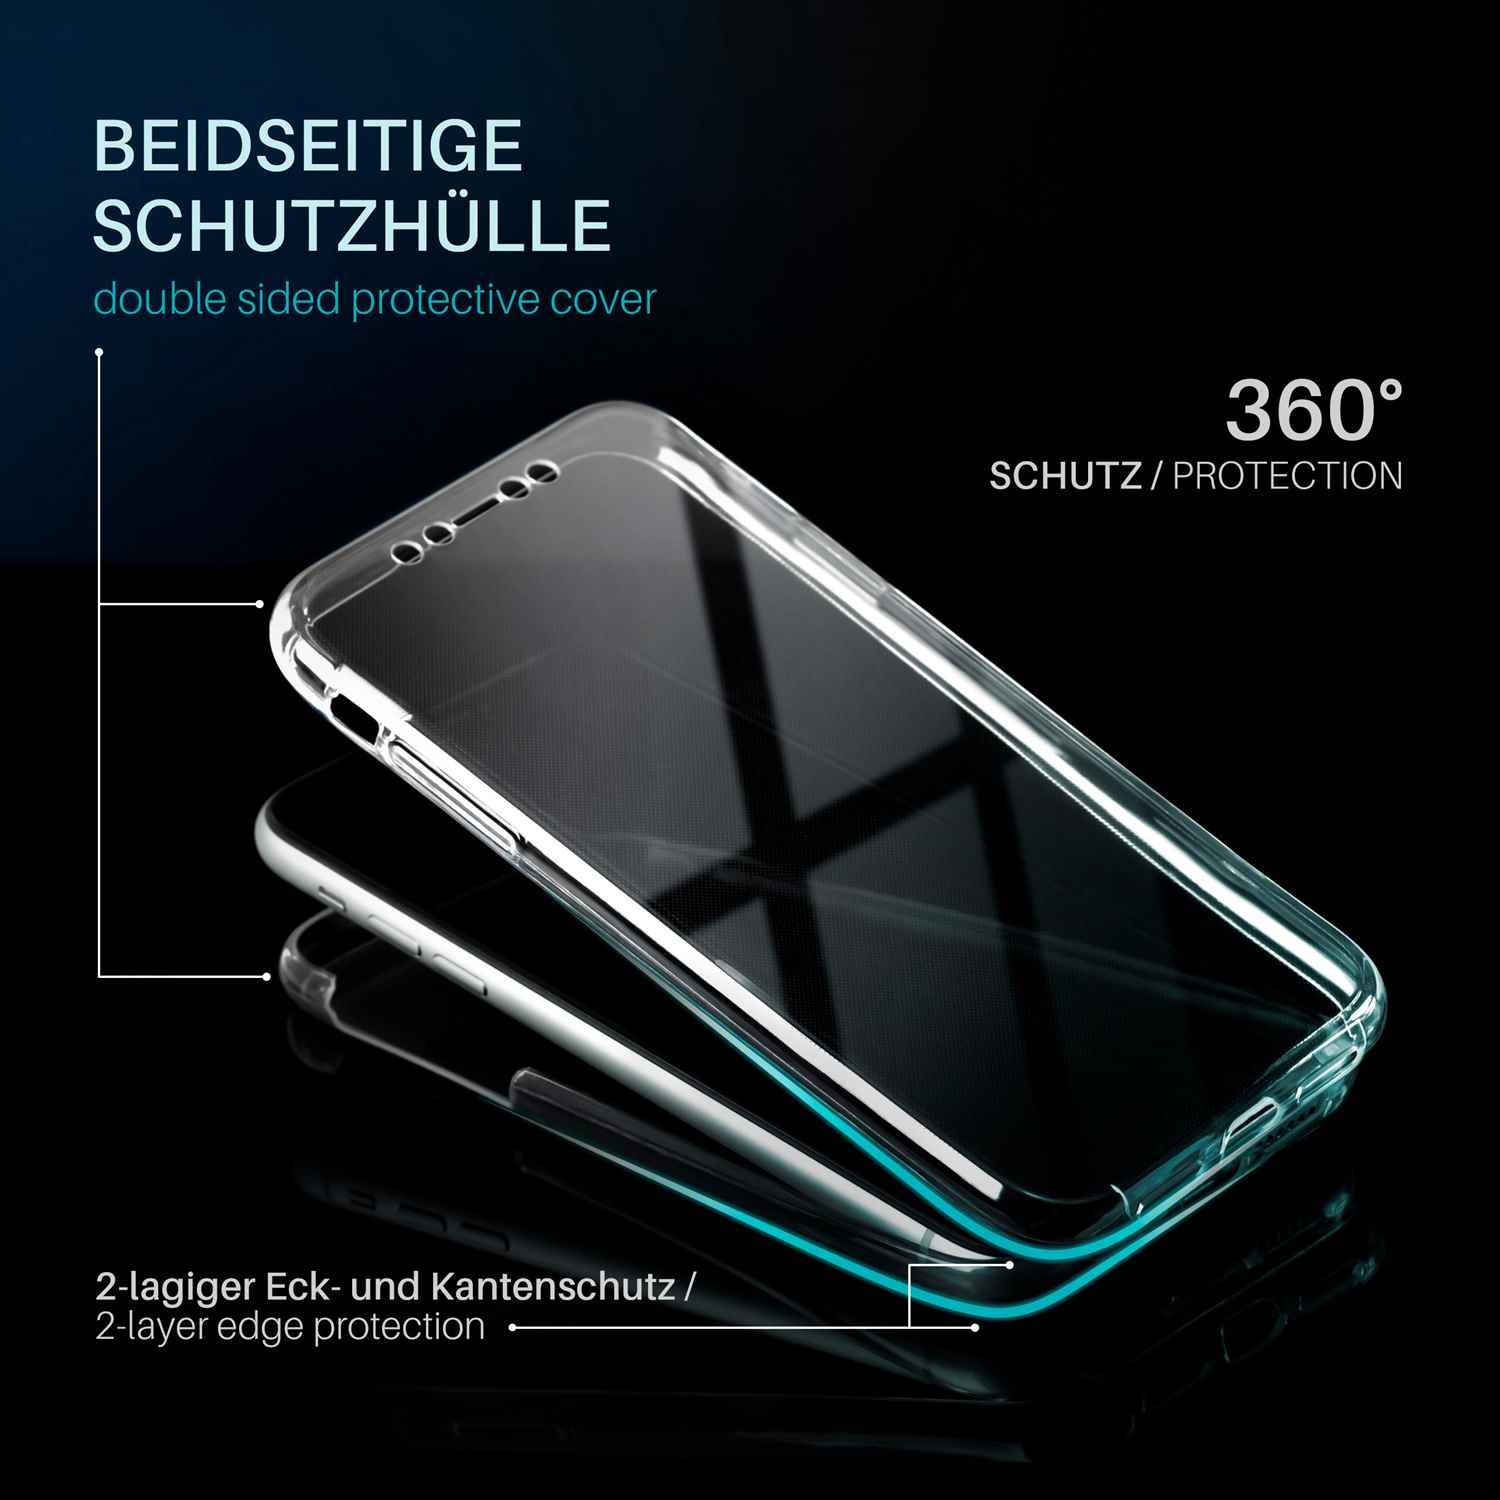 MOEX Double Huawei, Crystal Cover, Full P30 Pro, Case